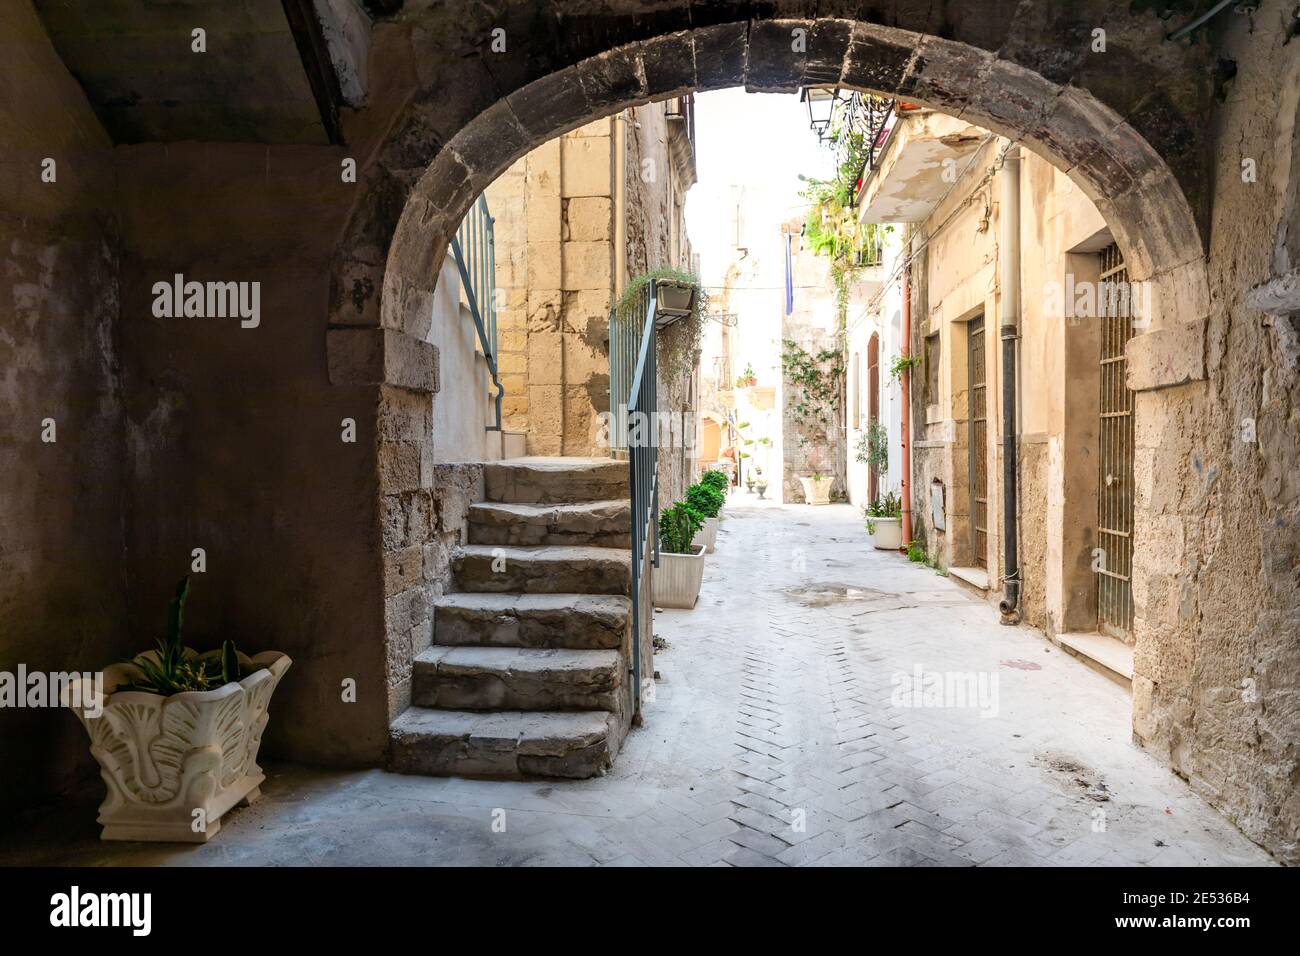 An ancient vaulted backalley in southern Italy, leading to a row of private houses Stock Photo